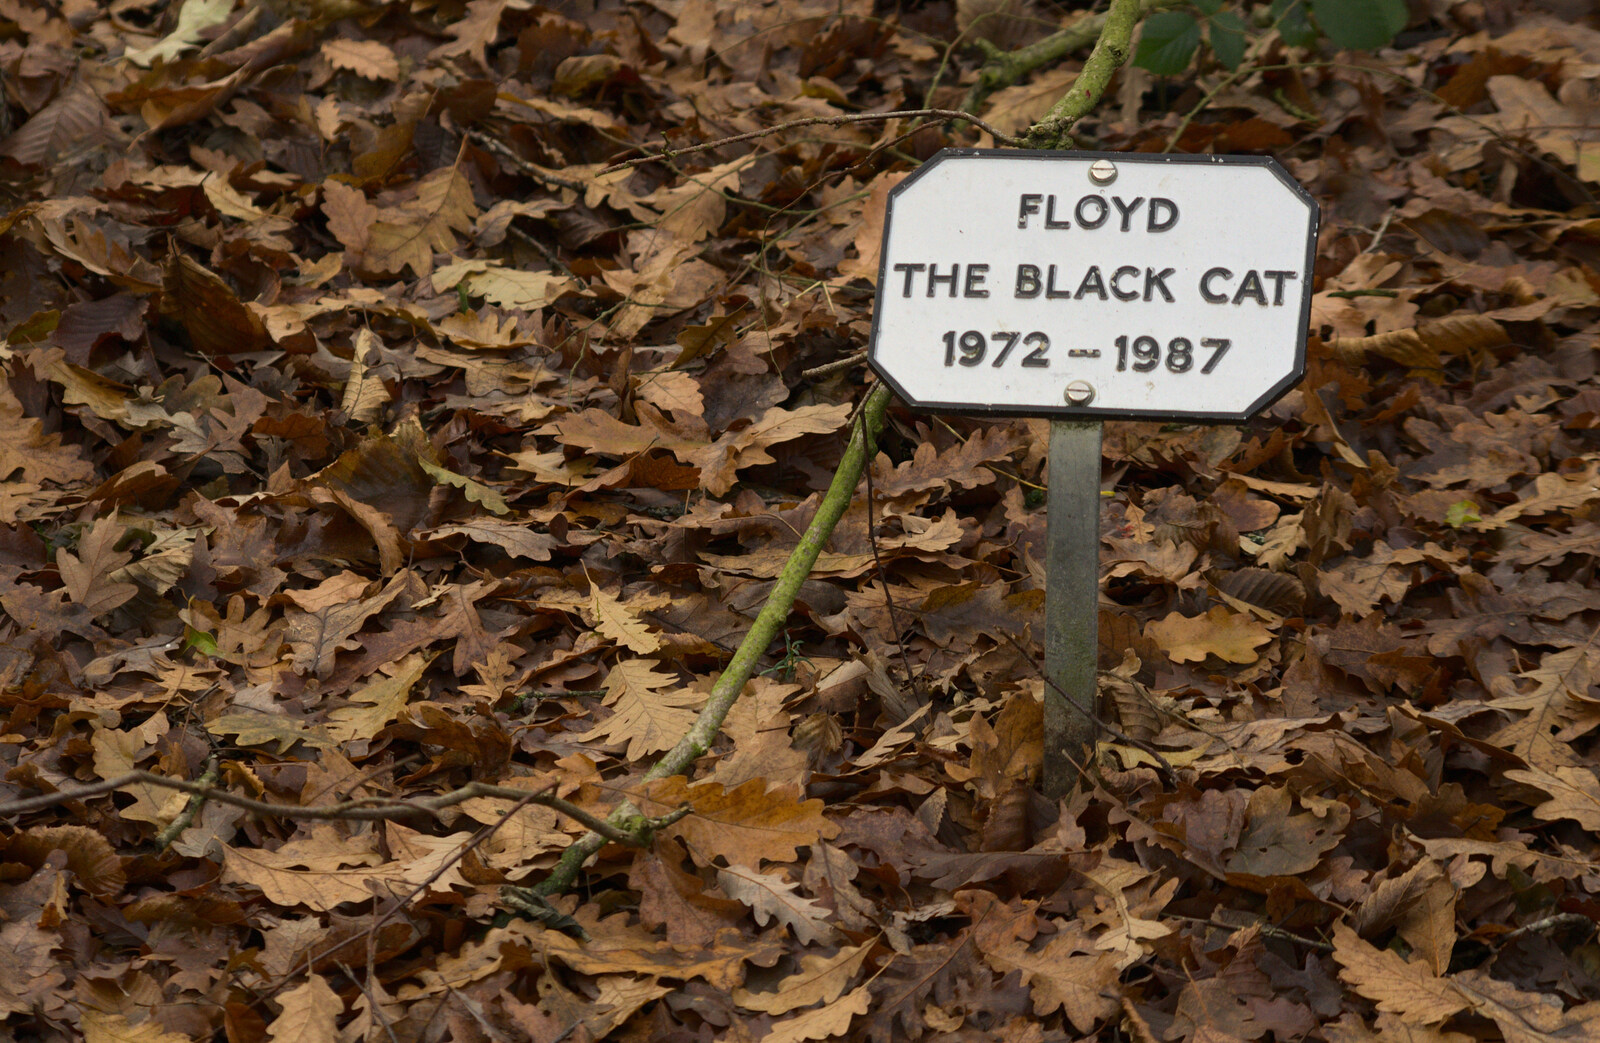 The grave of Floyd the Black Cat from Cameraphone Randomness and a Thornham Walk, Suffolk - 14th December 2014